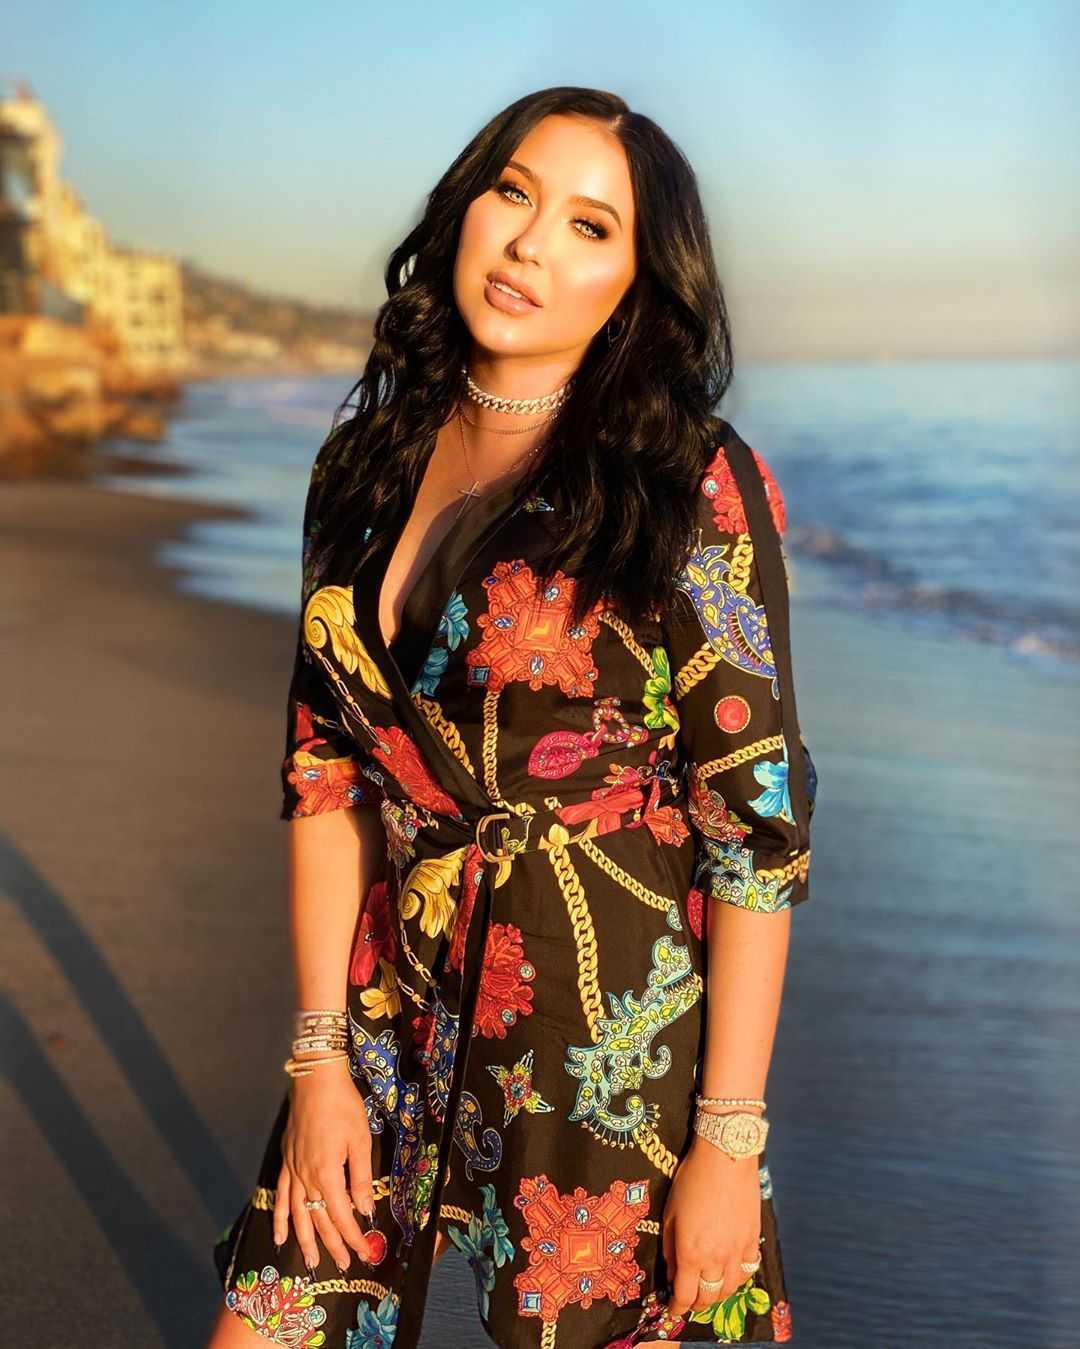 51 Sexy Jaclyn Hill Boobs Pictures Will Induce Passionate Feelings for Her 165